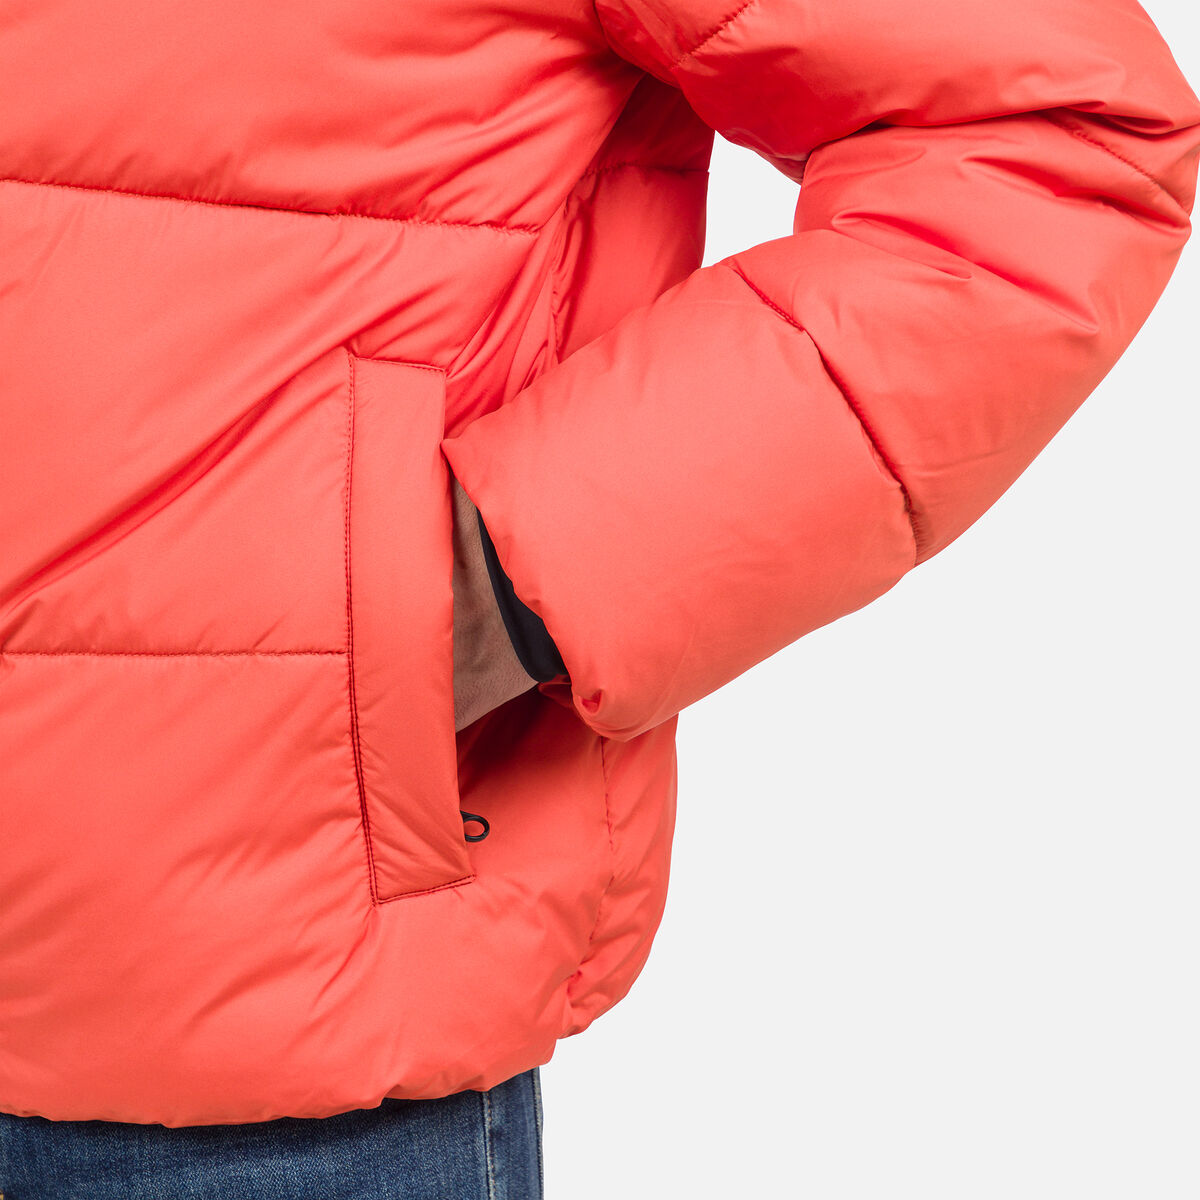 Men's Puffy Hooded Jacket